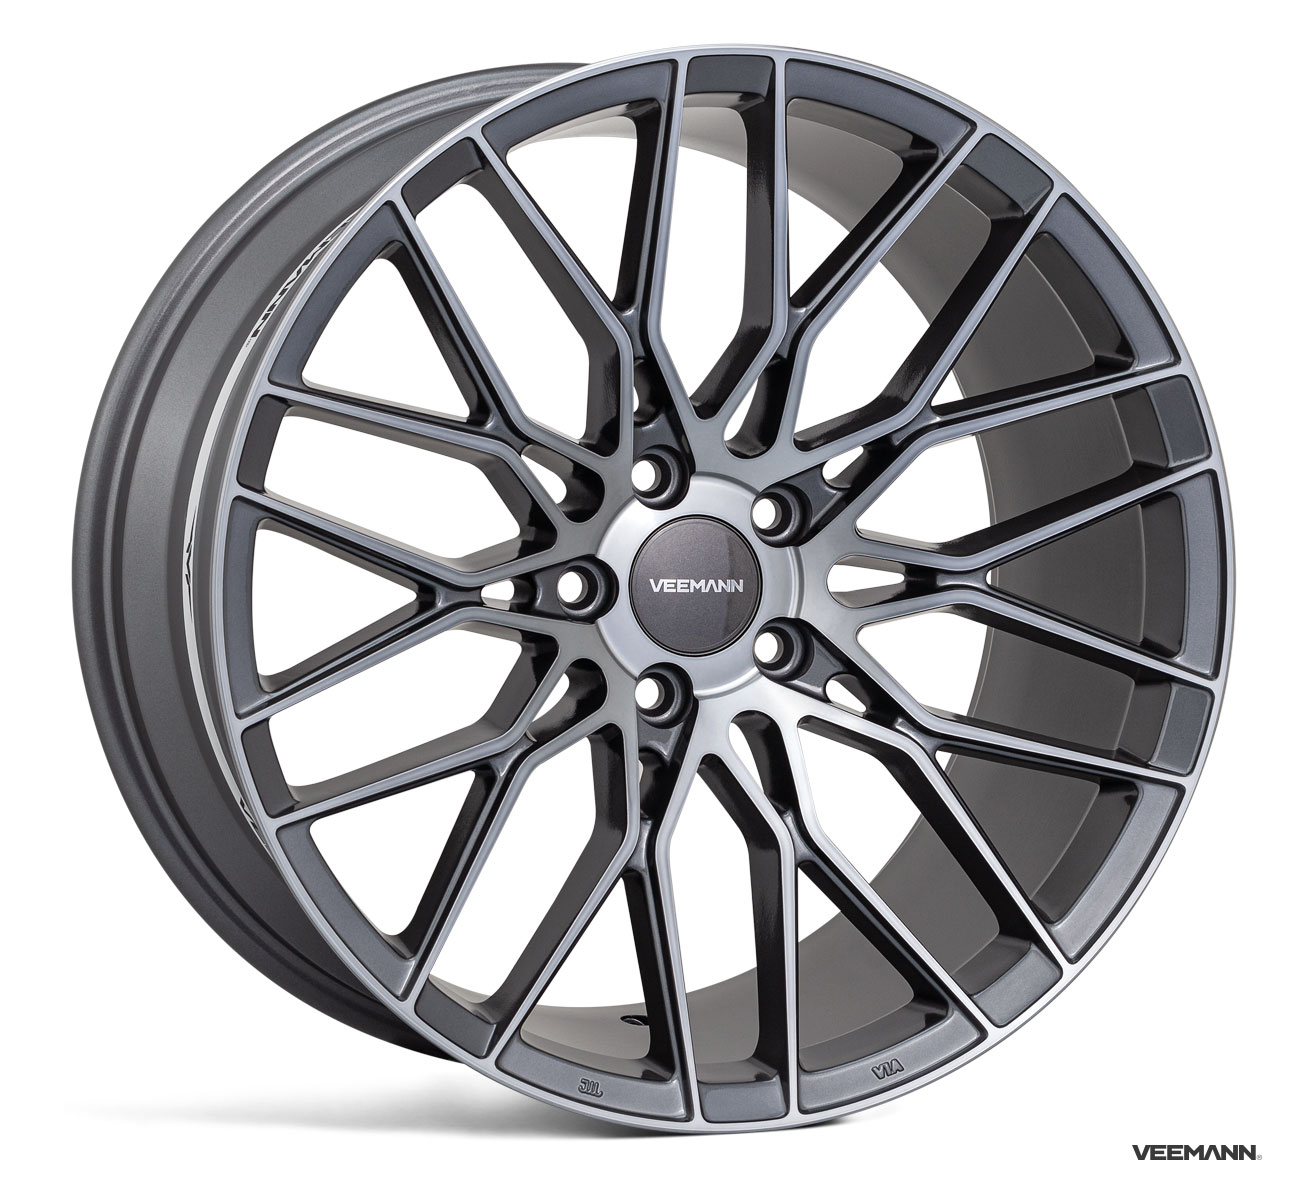 NEW 20" VEEMANN V-FS34 ALLOY WHEELS IN GRAPHITE SMOKE POLISHED WITH WIDER 10" REARS